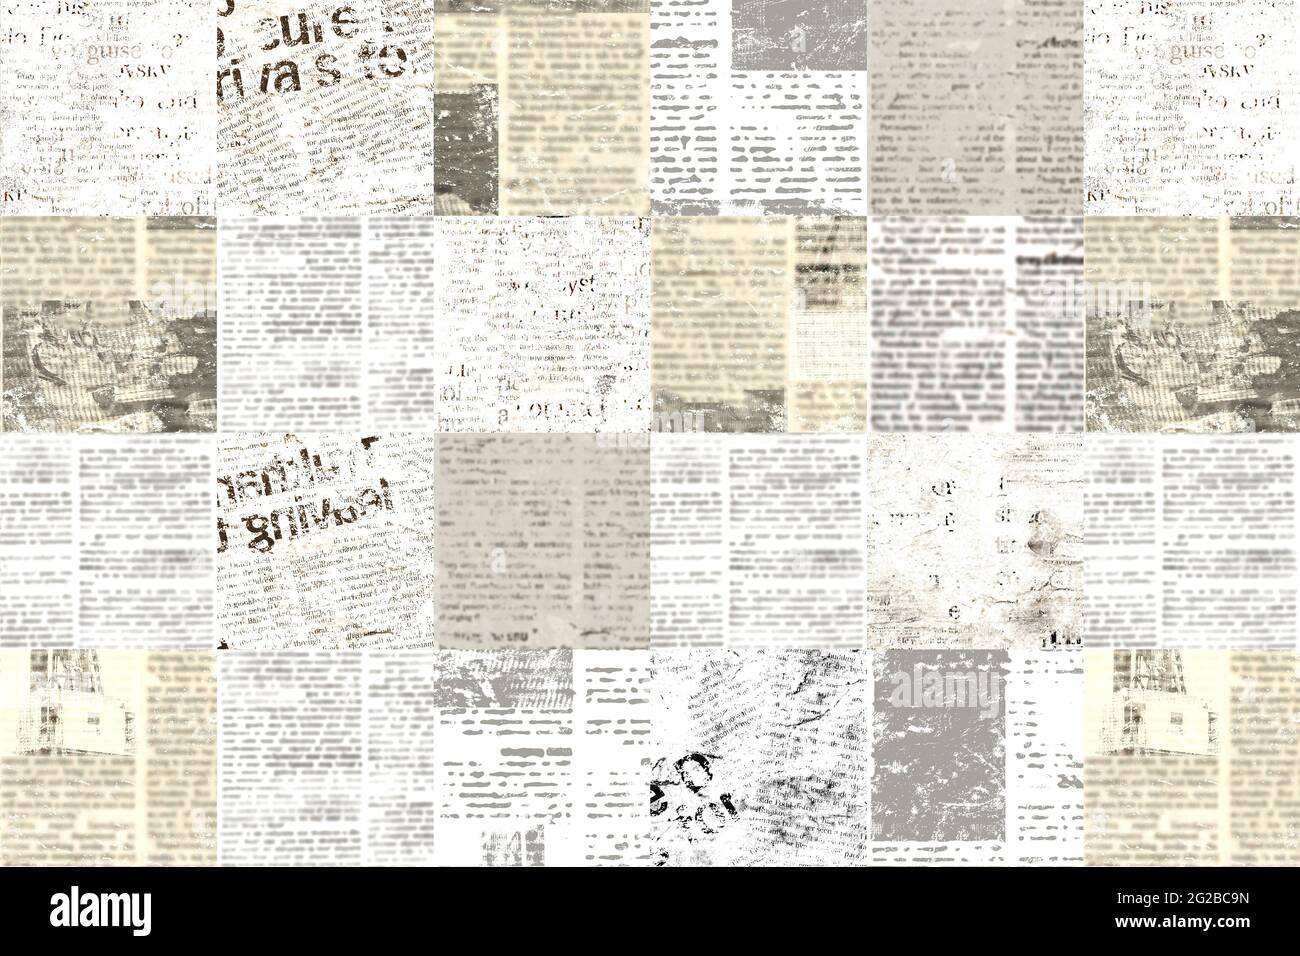 Newspaper Collage Art High Resolution Stock Photography And Images Alamy